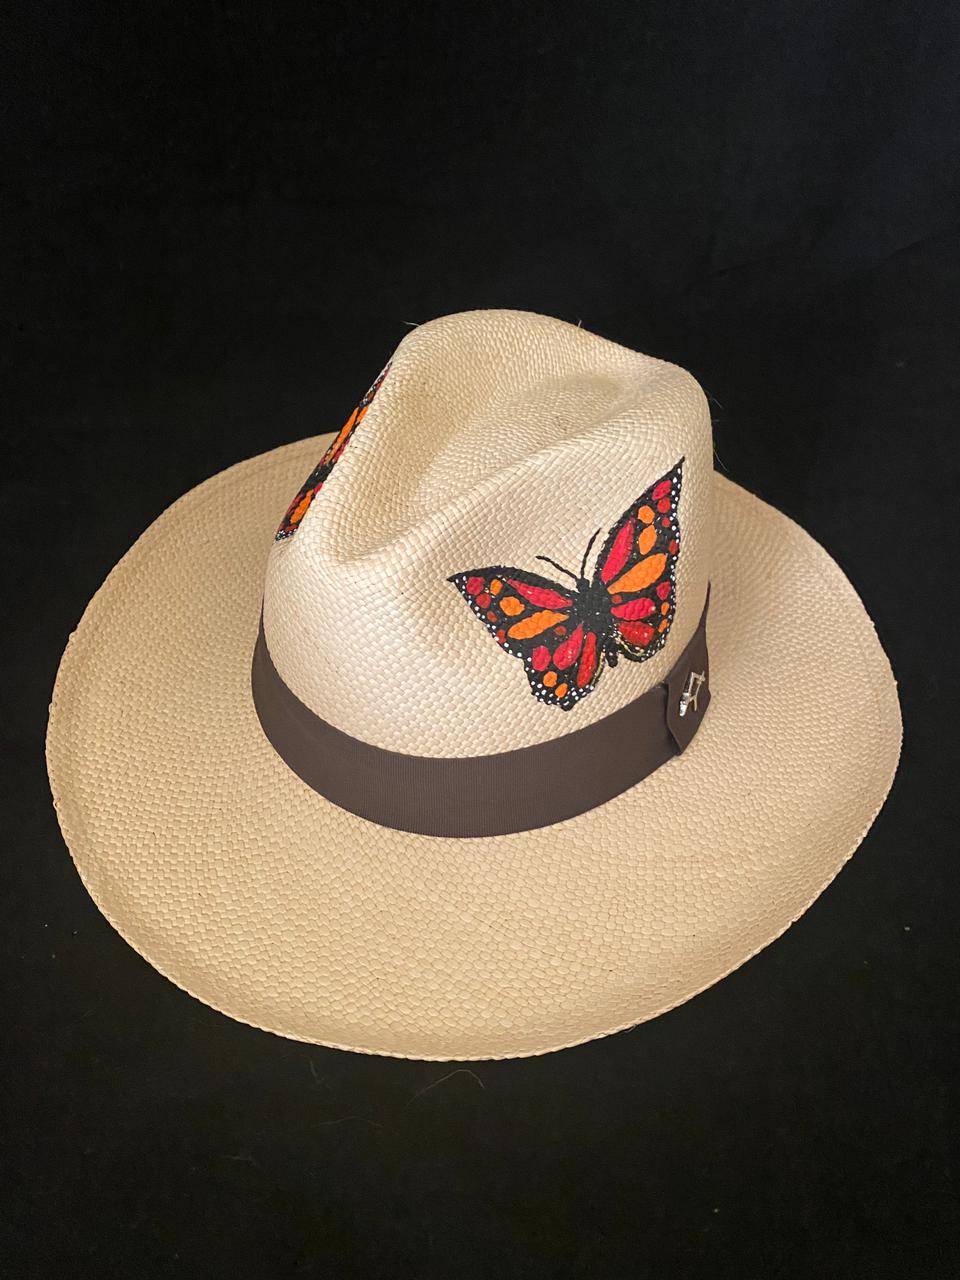 Hand Painted Hat, Painted Straw Hat, Straw Hat, Mexican Hat